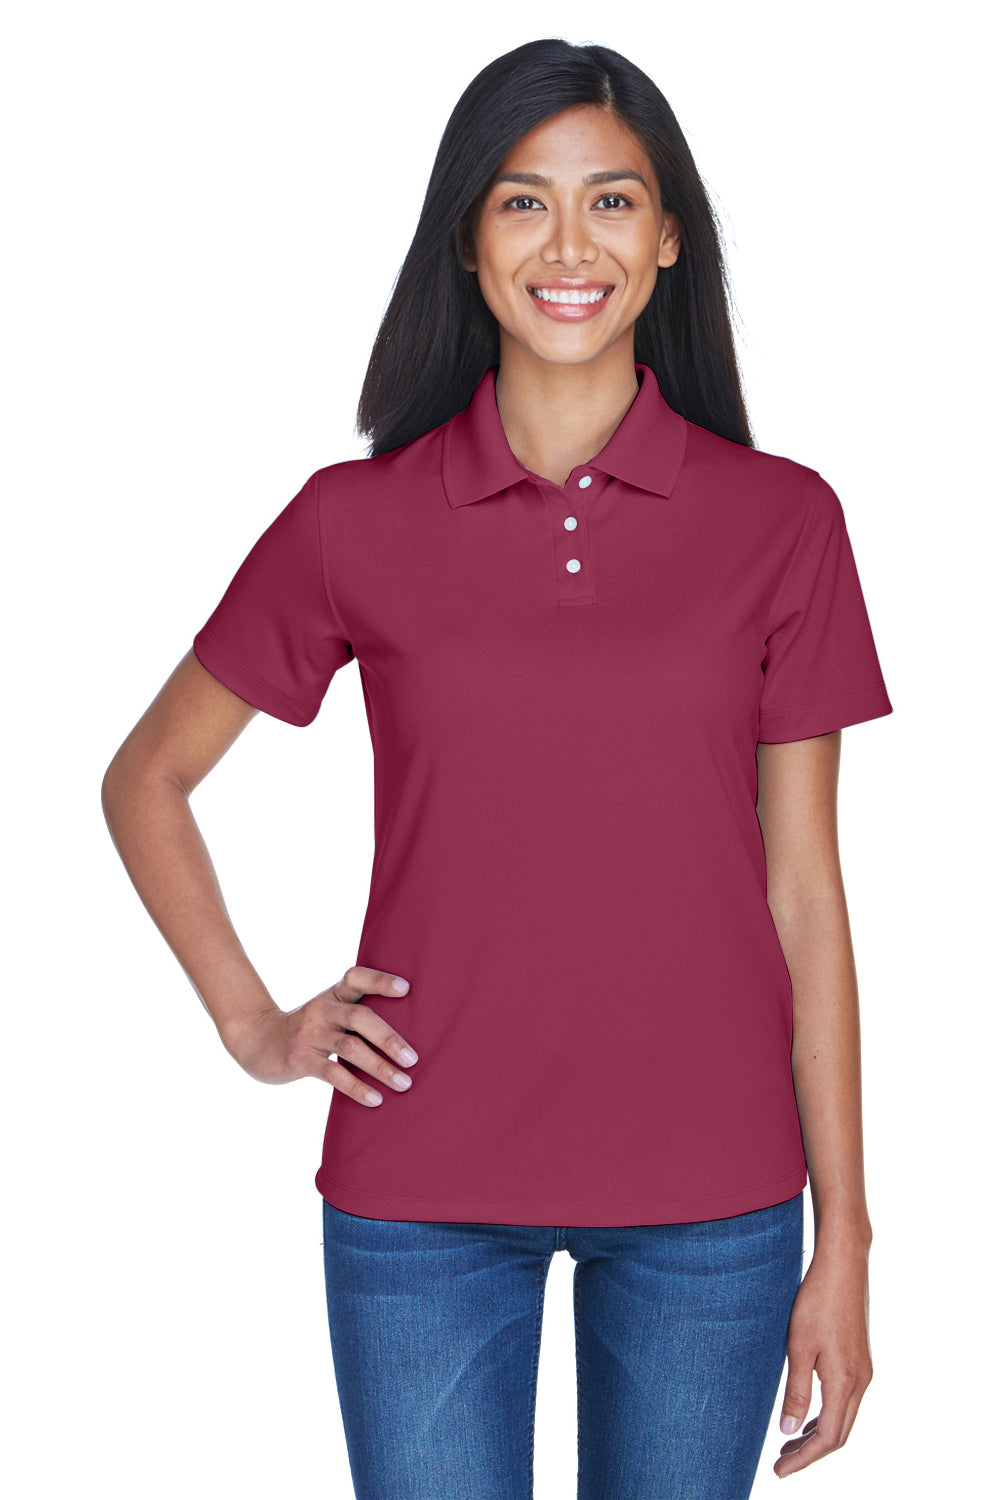 UltraClub 8445L Womens Cool & Dry Performance Moisture Wicking Short Sleeve Polo Shirt Maroon Front